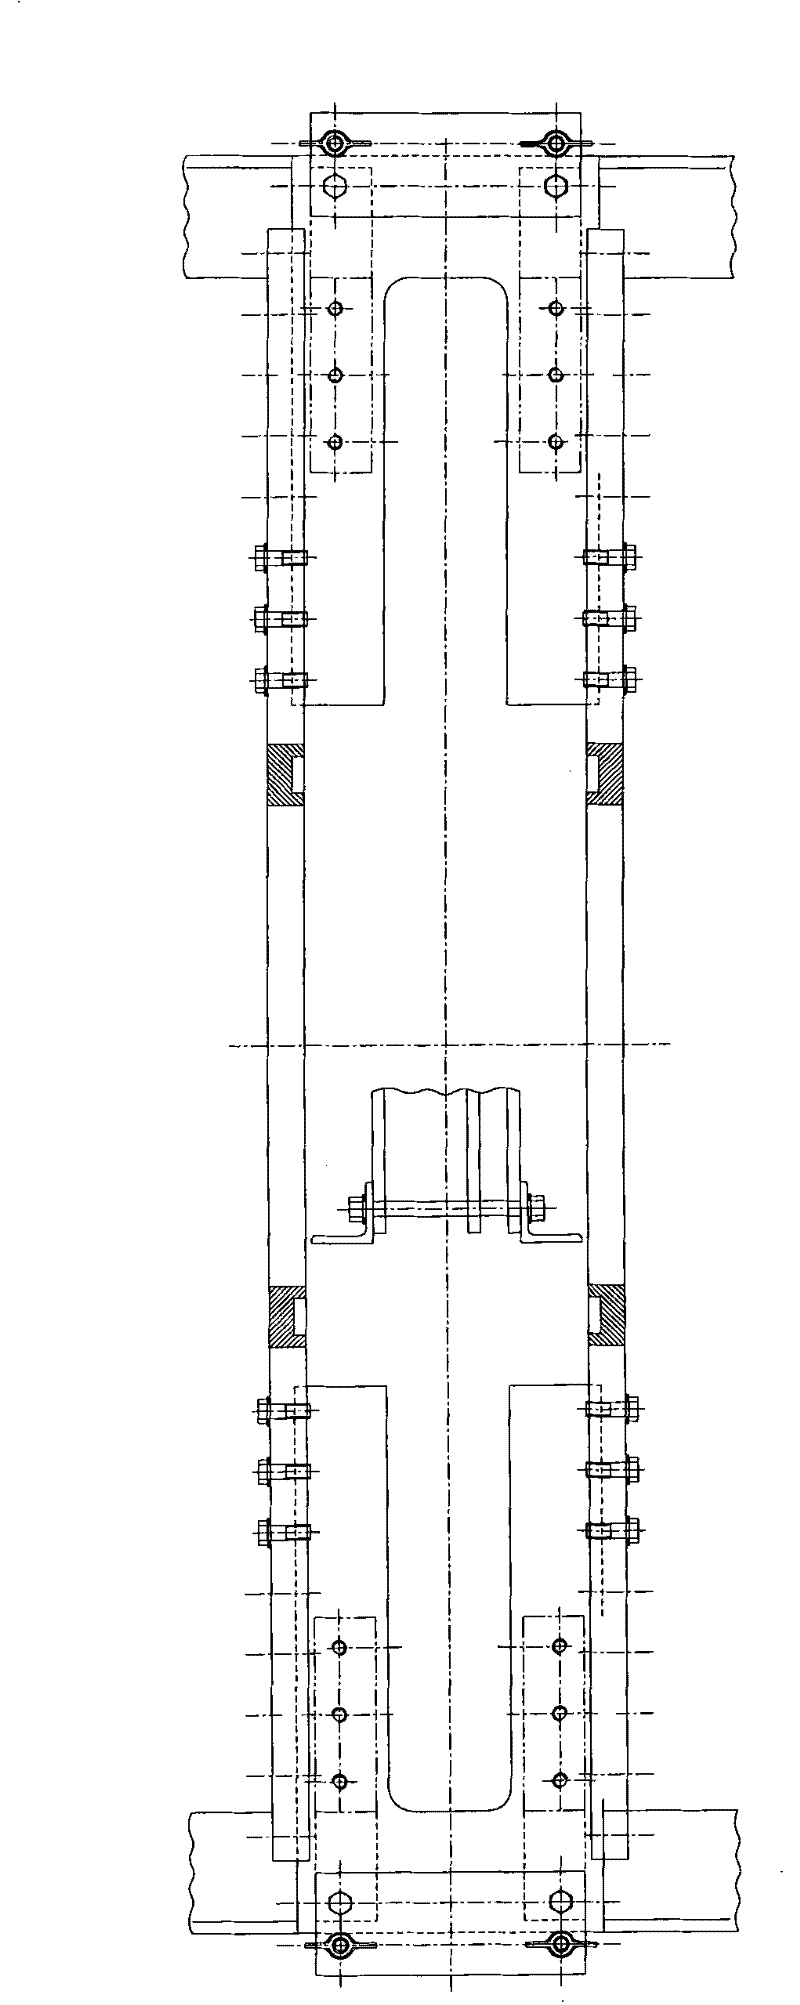 Line raising equipment and line raising method for live working of electric transmission line